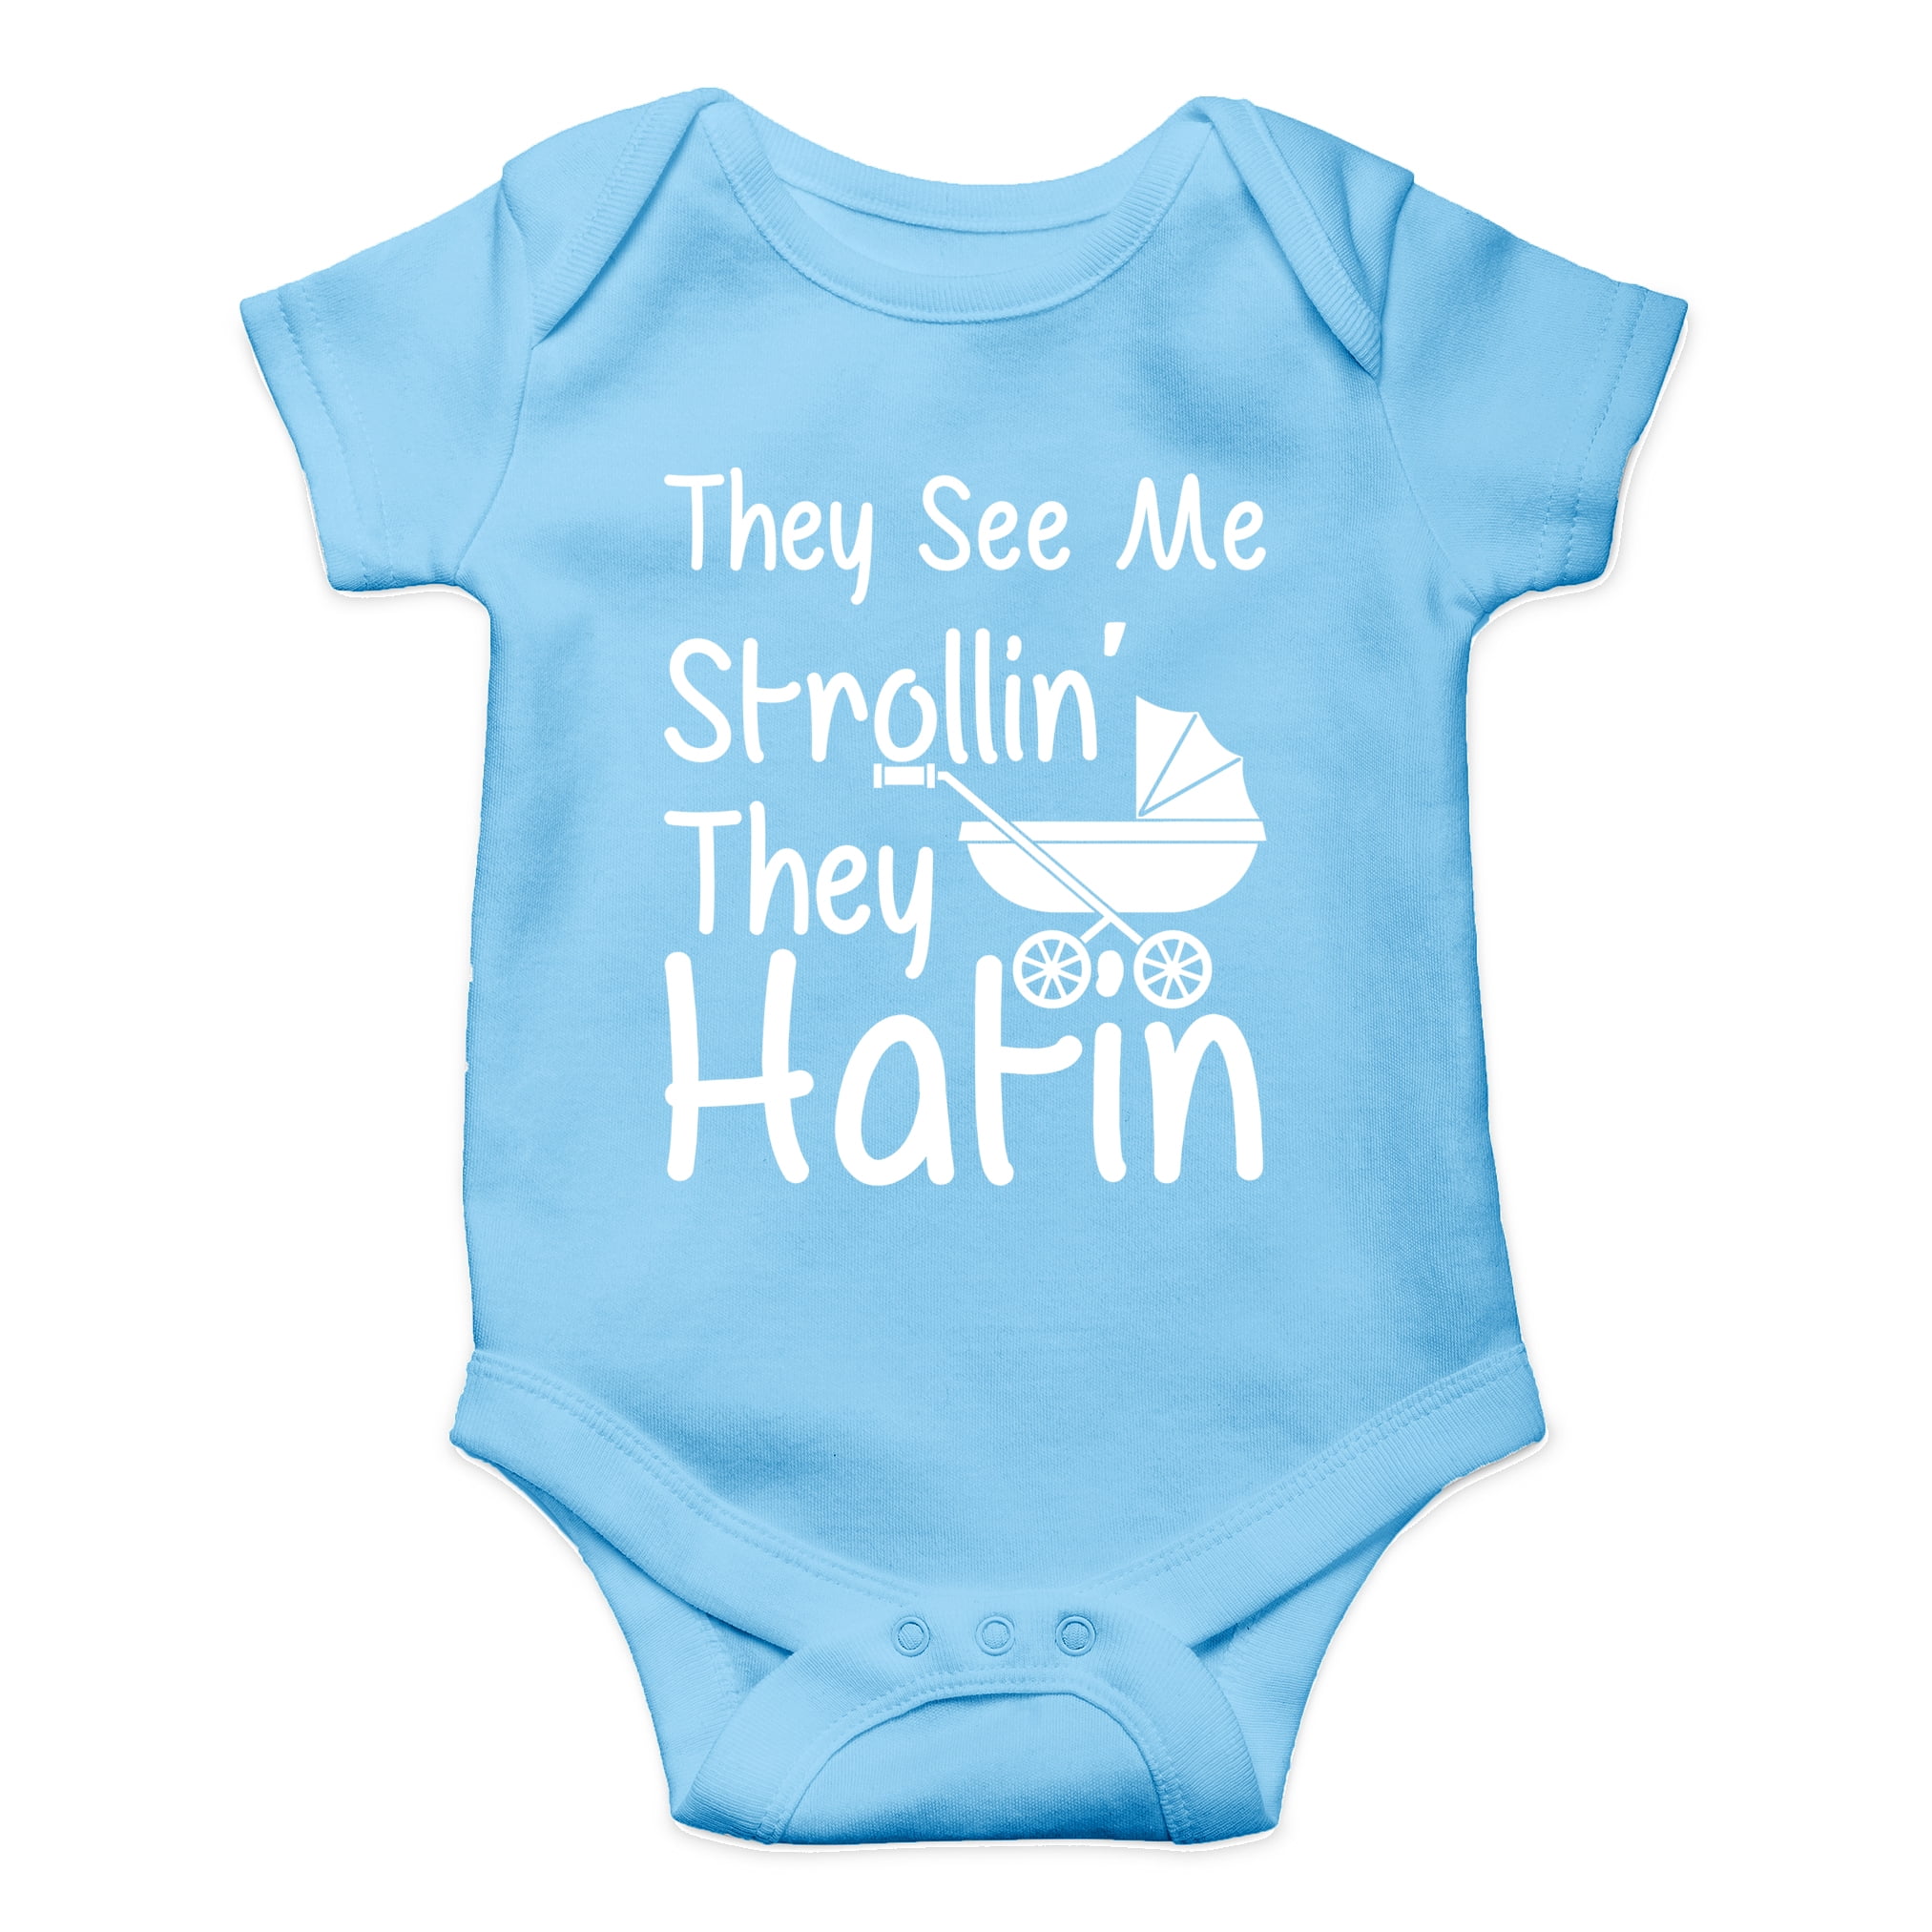 Baby Bodysuit They See Me Strollin They Hatin Baby Clothes for Infants 